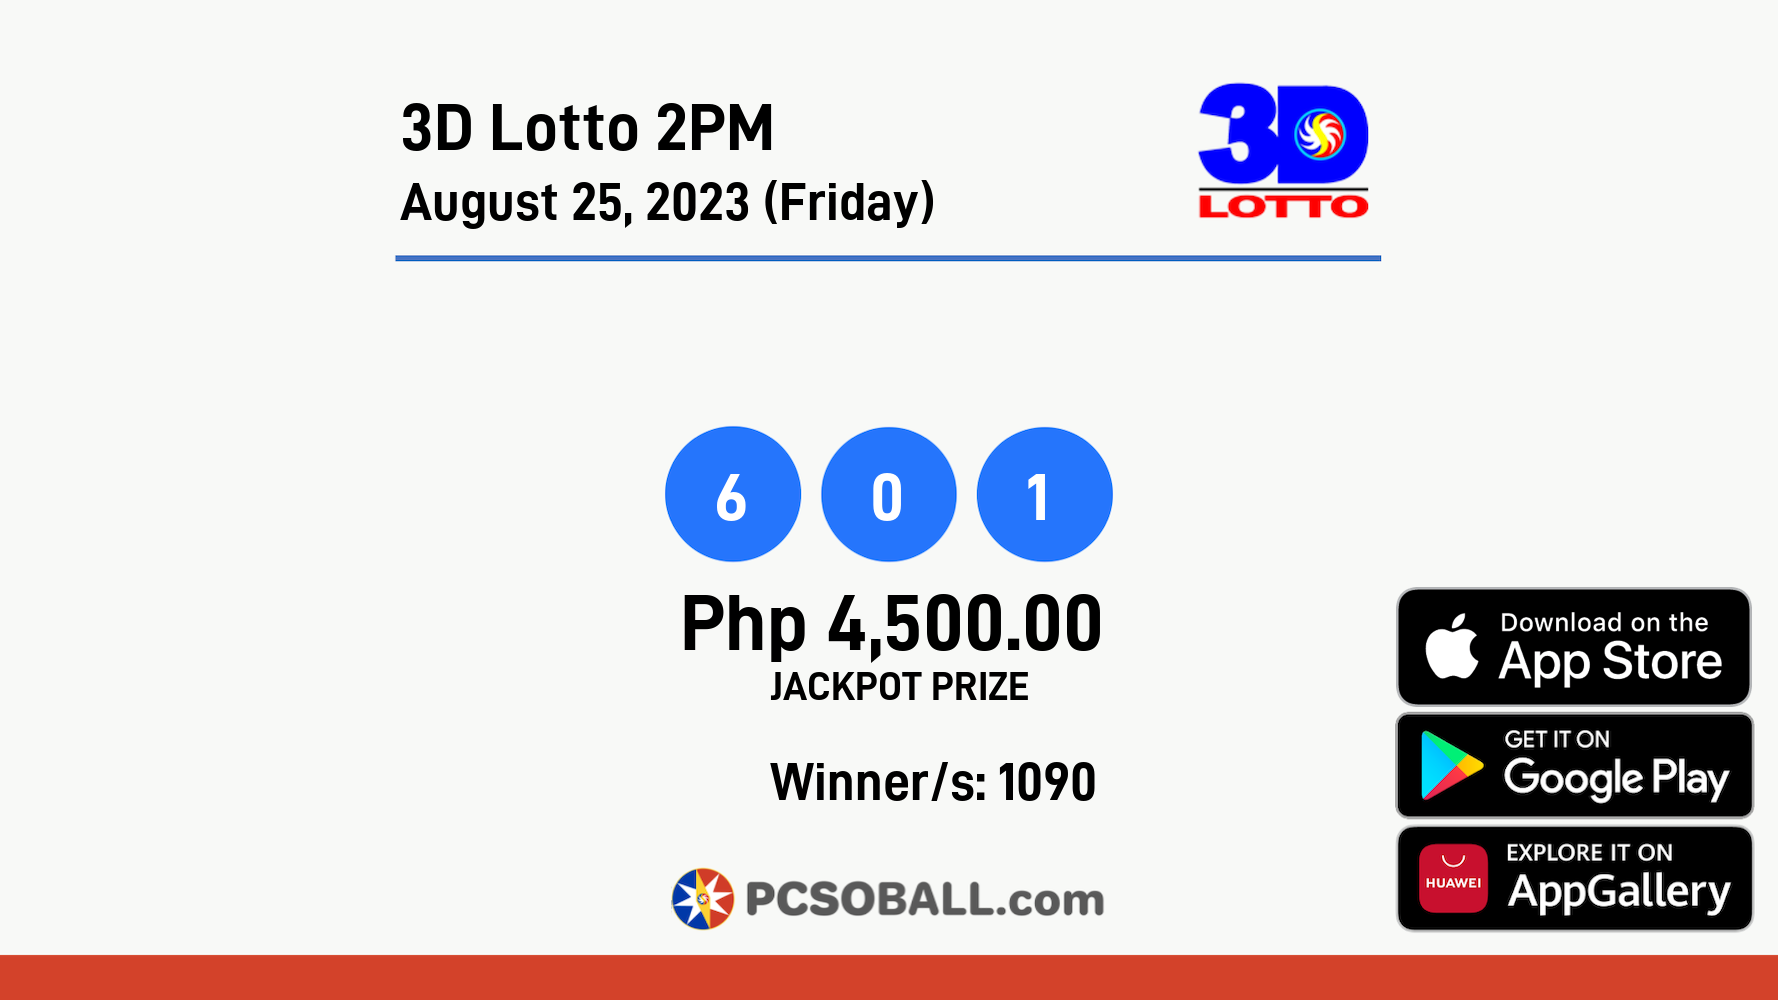 3D Lotto 2PM August 25, 2023 (Friday) Result